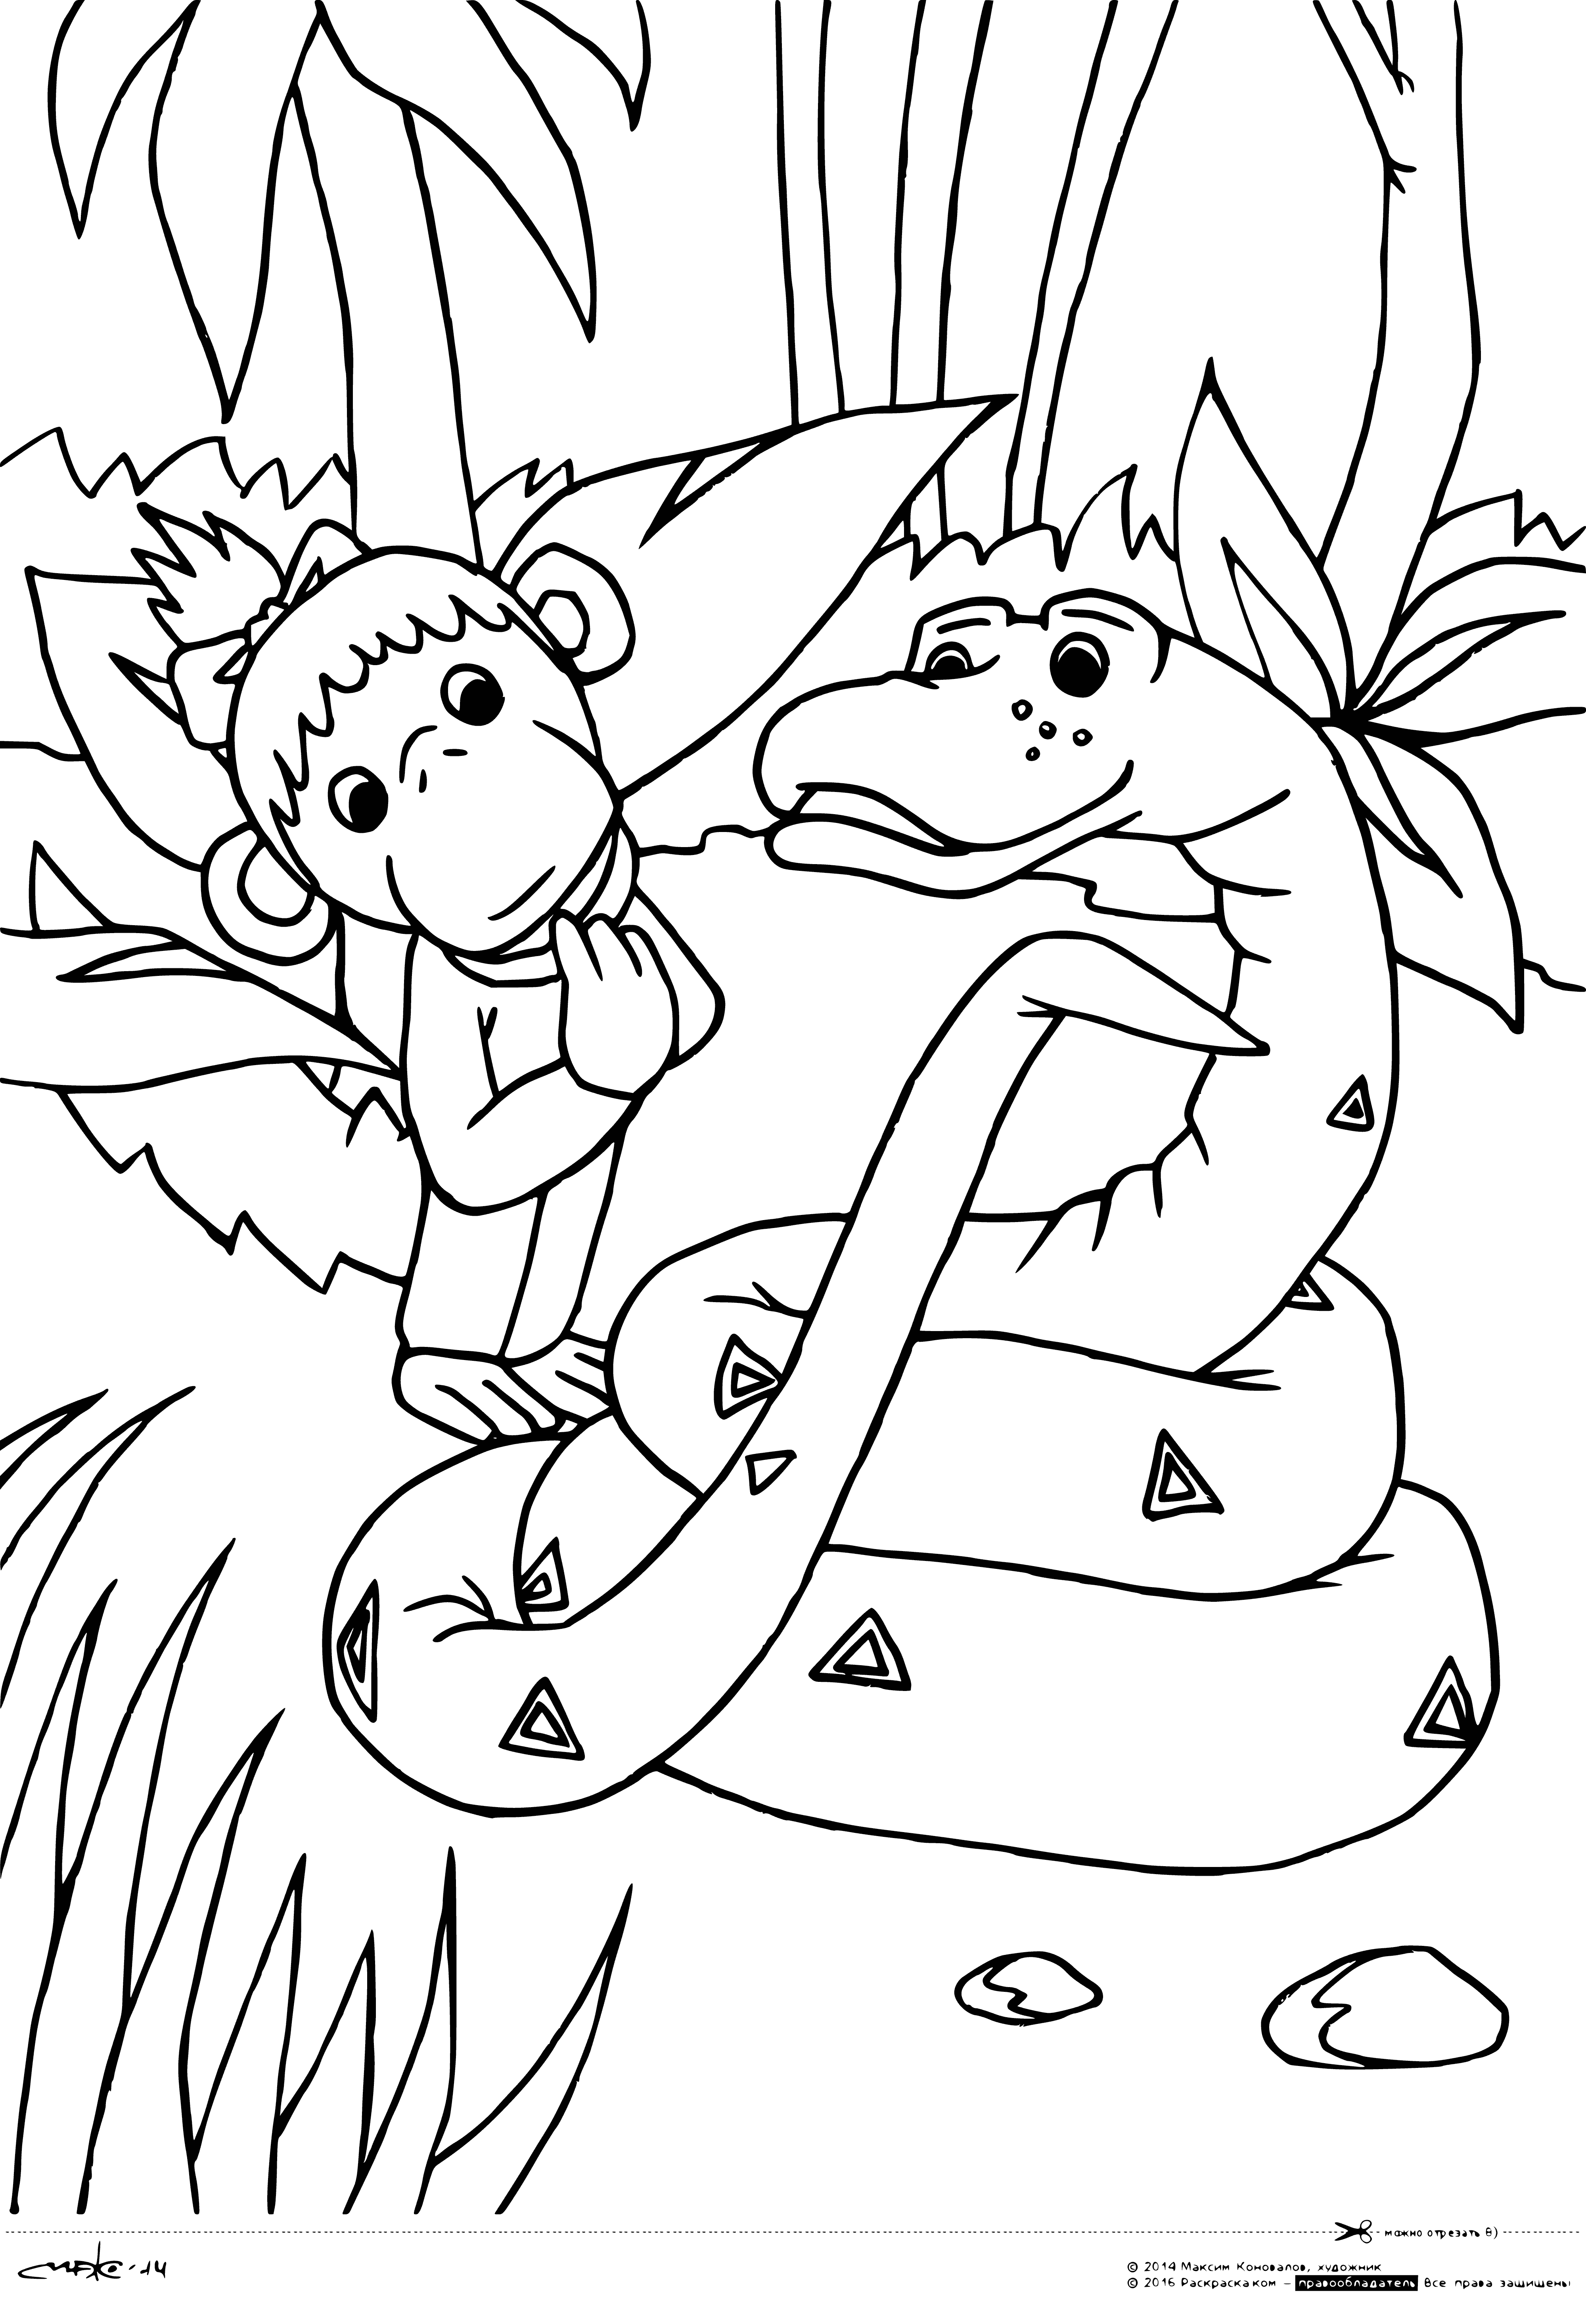 coloring page: 38 parrots on a branch - 20 green, 18 yellow, all with a red beak.